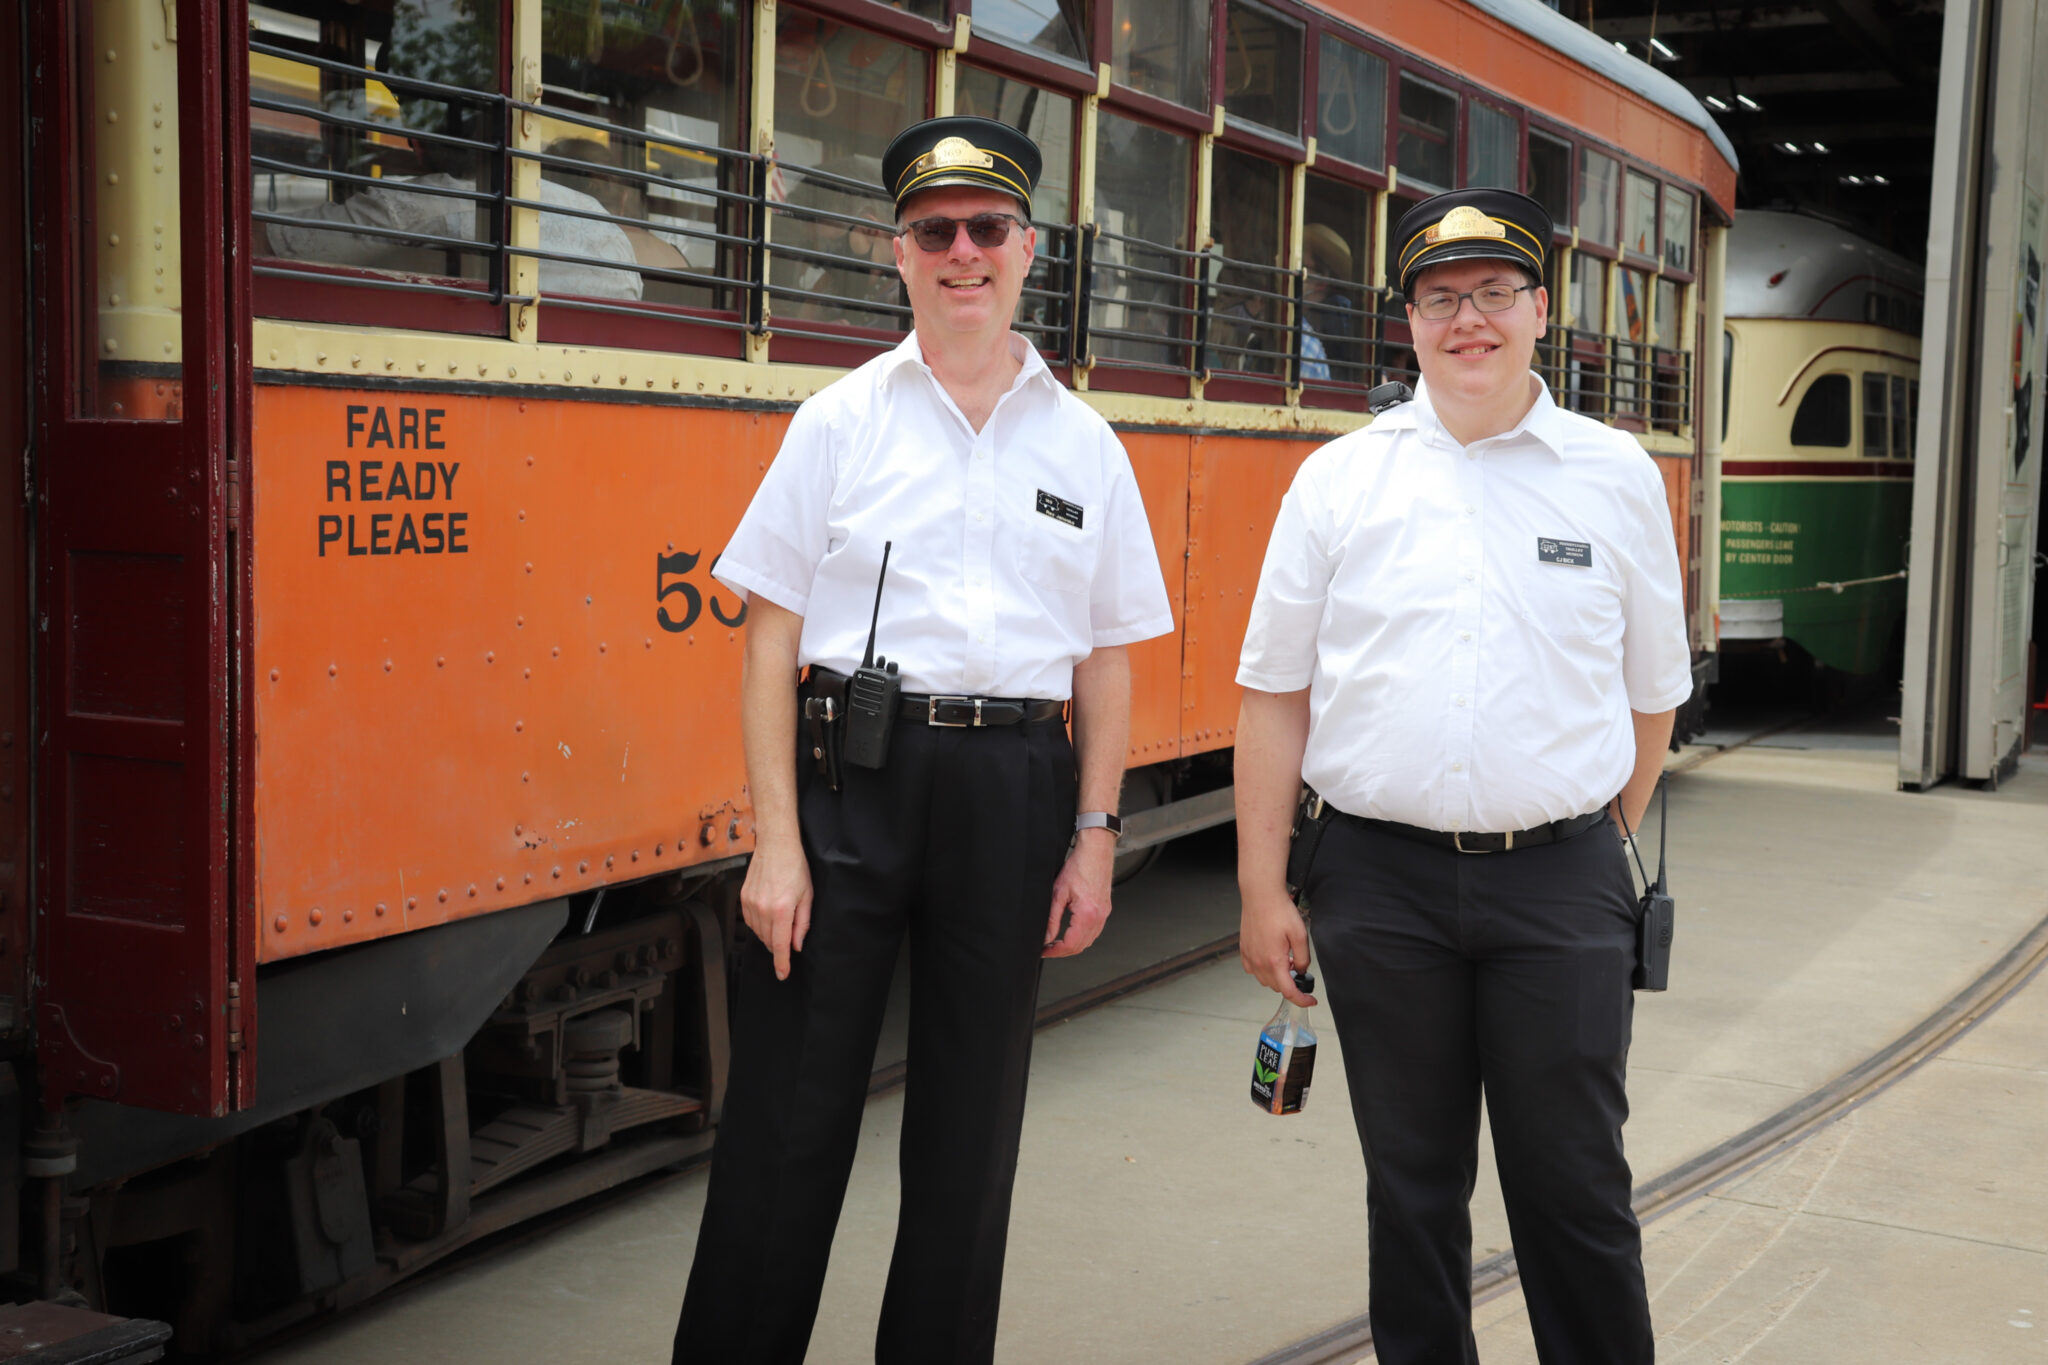 Two operators in uniform smile in front of car 5326